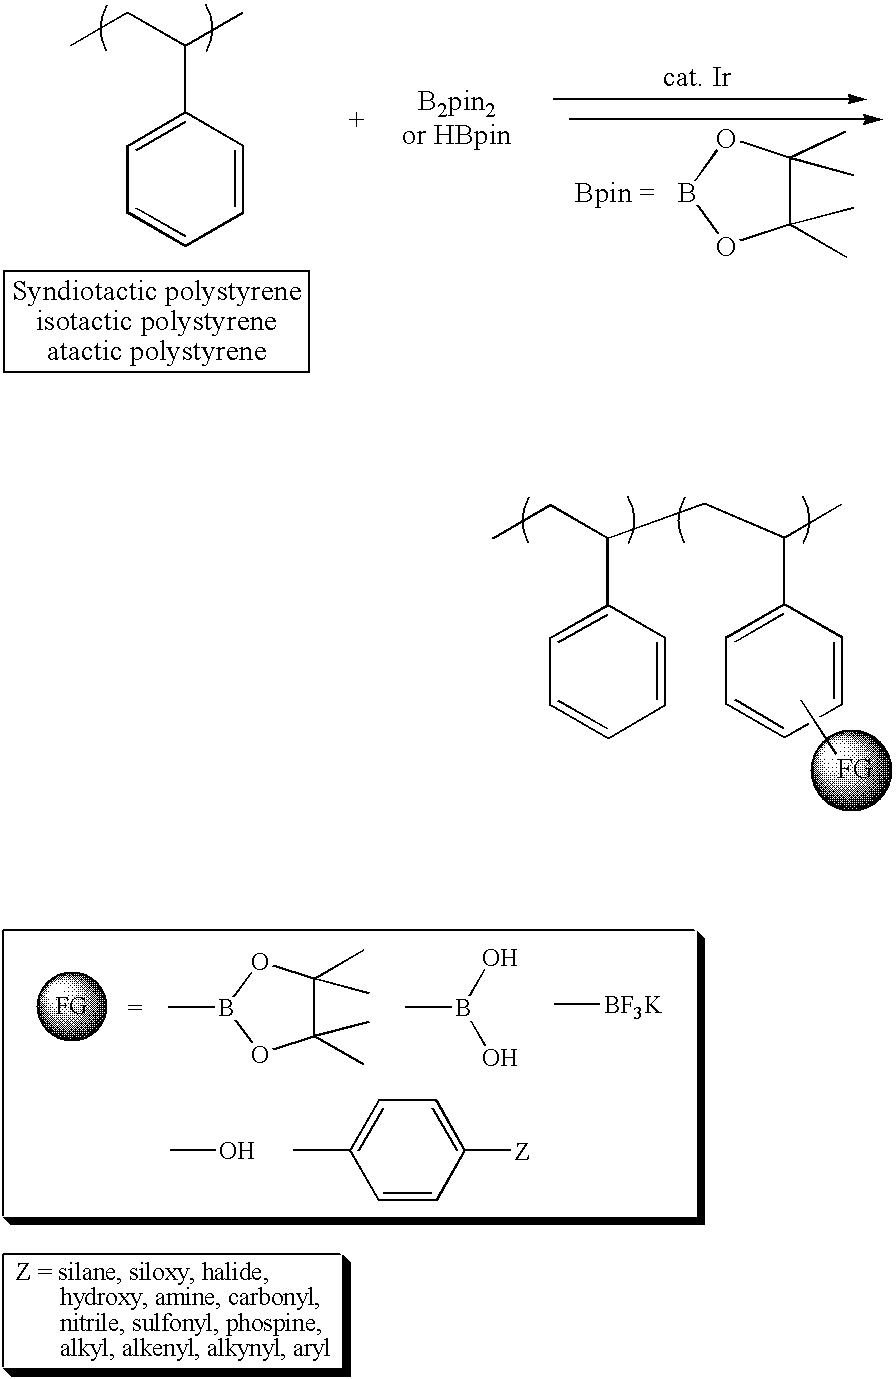 Modification of polymers having aromatic groups through formation of boronic ester groups